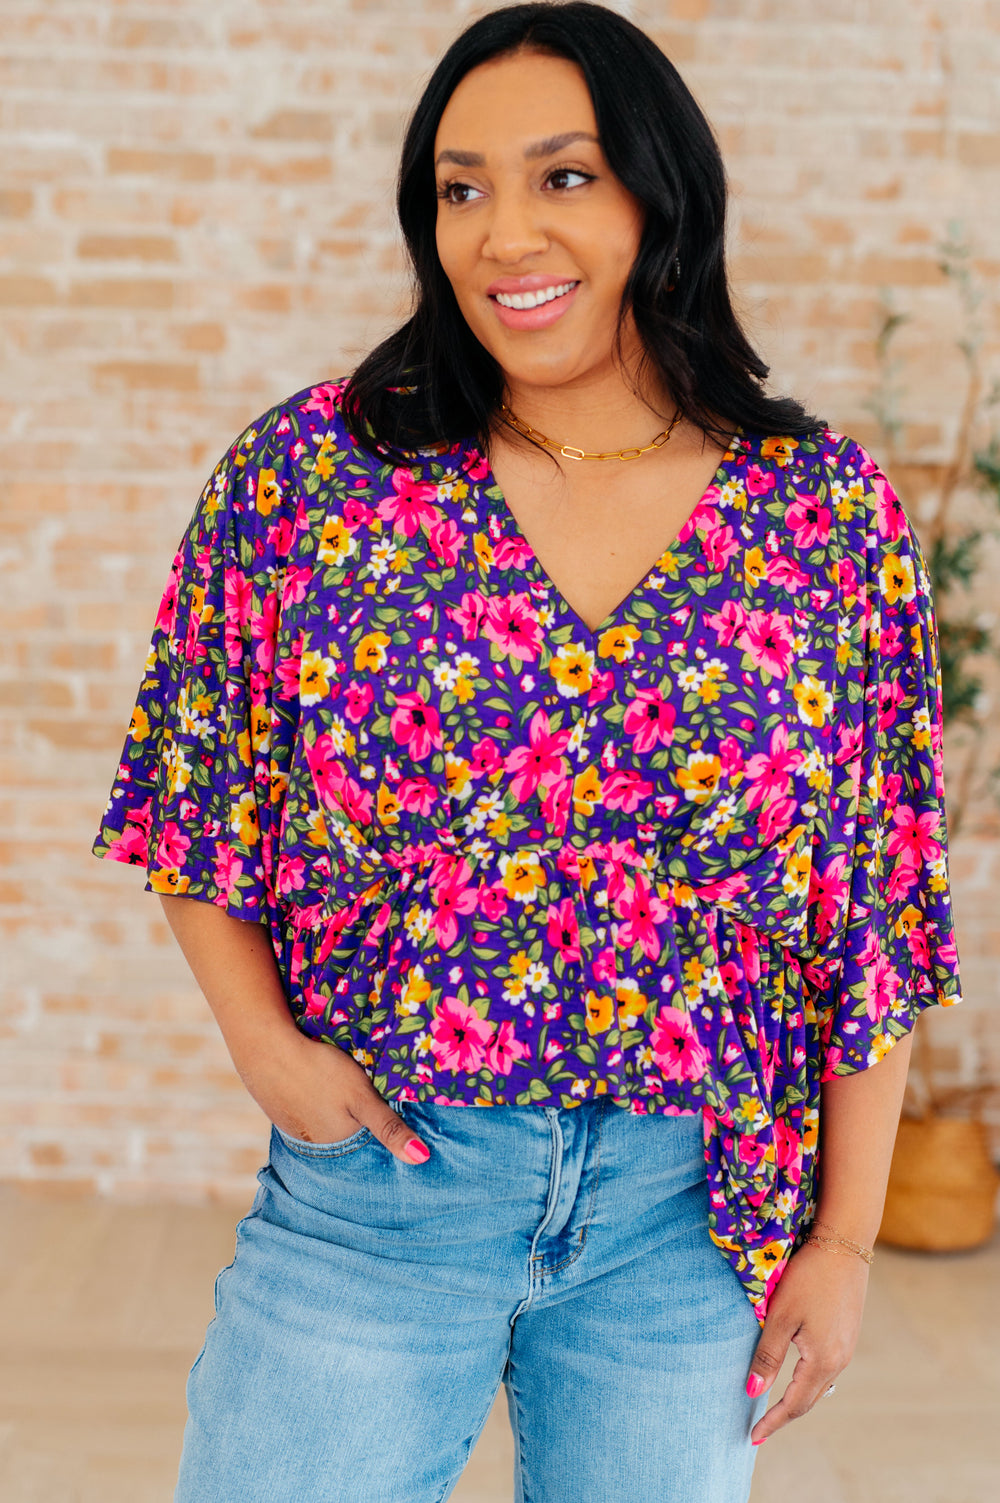 Dreamer Peplum Top in Purple and Pink Floral-Long Sleeve Tops-Inspired by Justeen-Women's Clothing Boutique in Chicago, Illinois